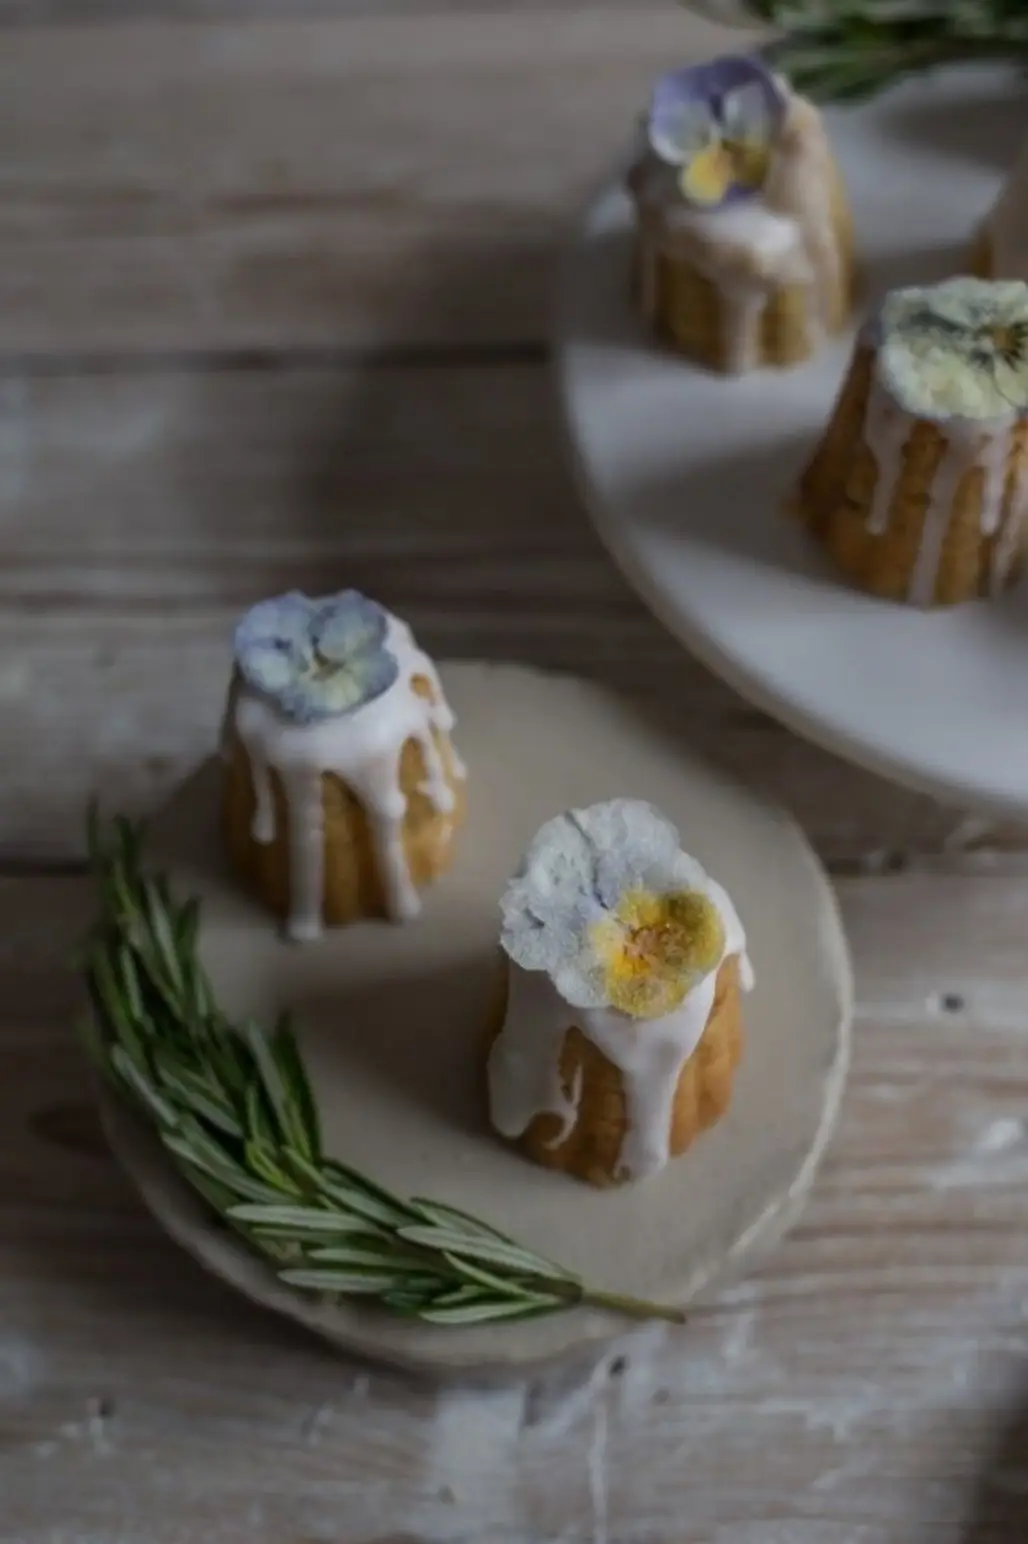 Miniature Lemon, Almond and Rosemary Olive Oil Cakes with a Hint of Cointreau